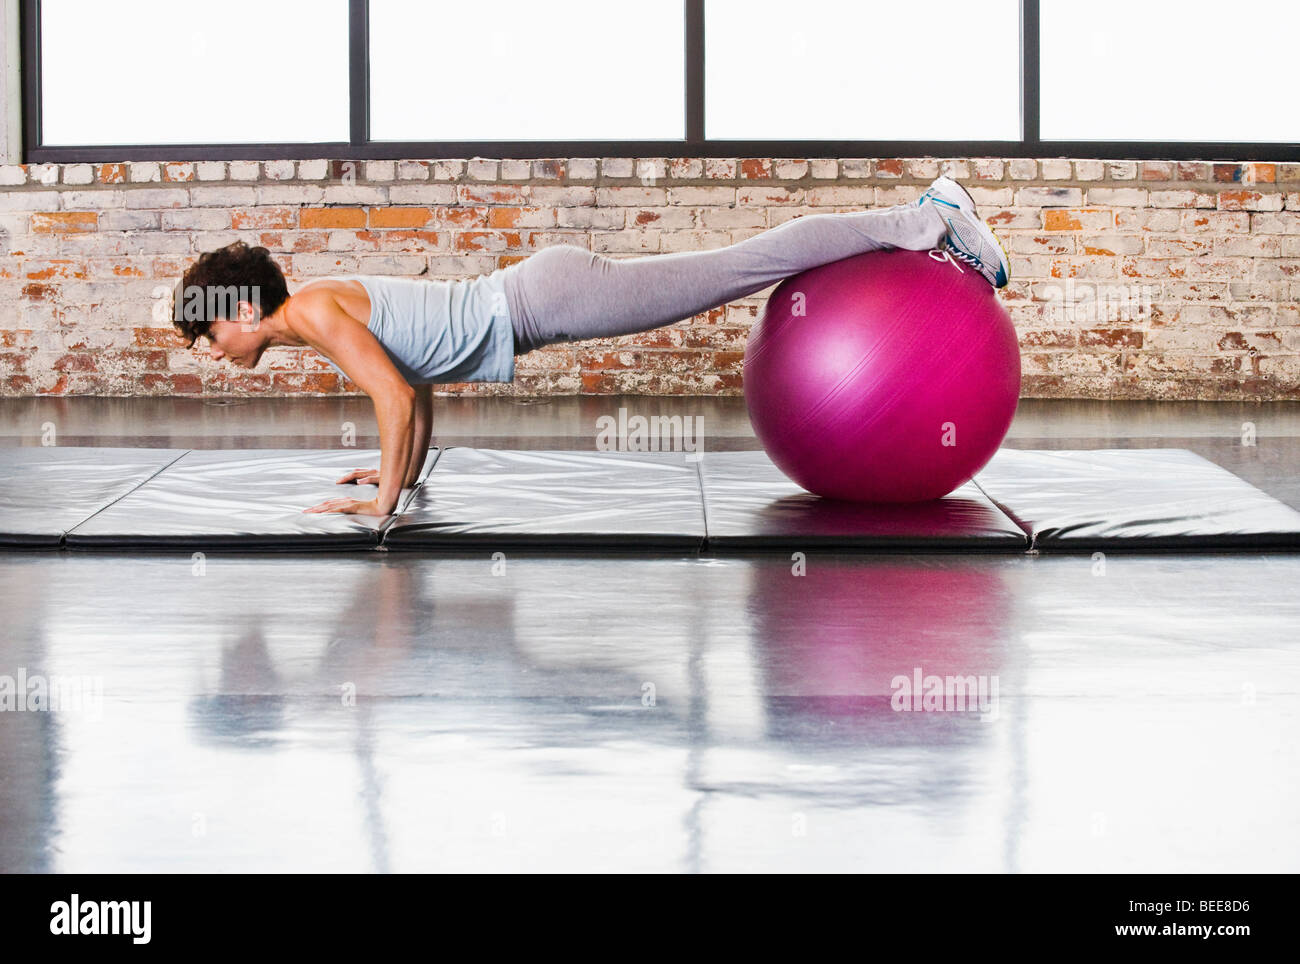 A young woman doing pushups on a mat in a health club while balancing her legs / feet on a exercise ball. Stock Photo